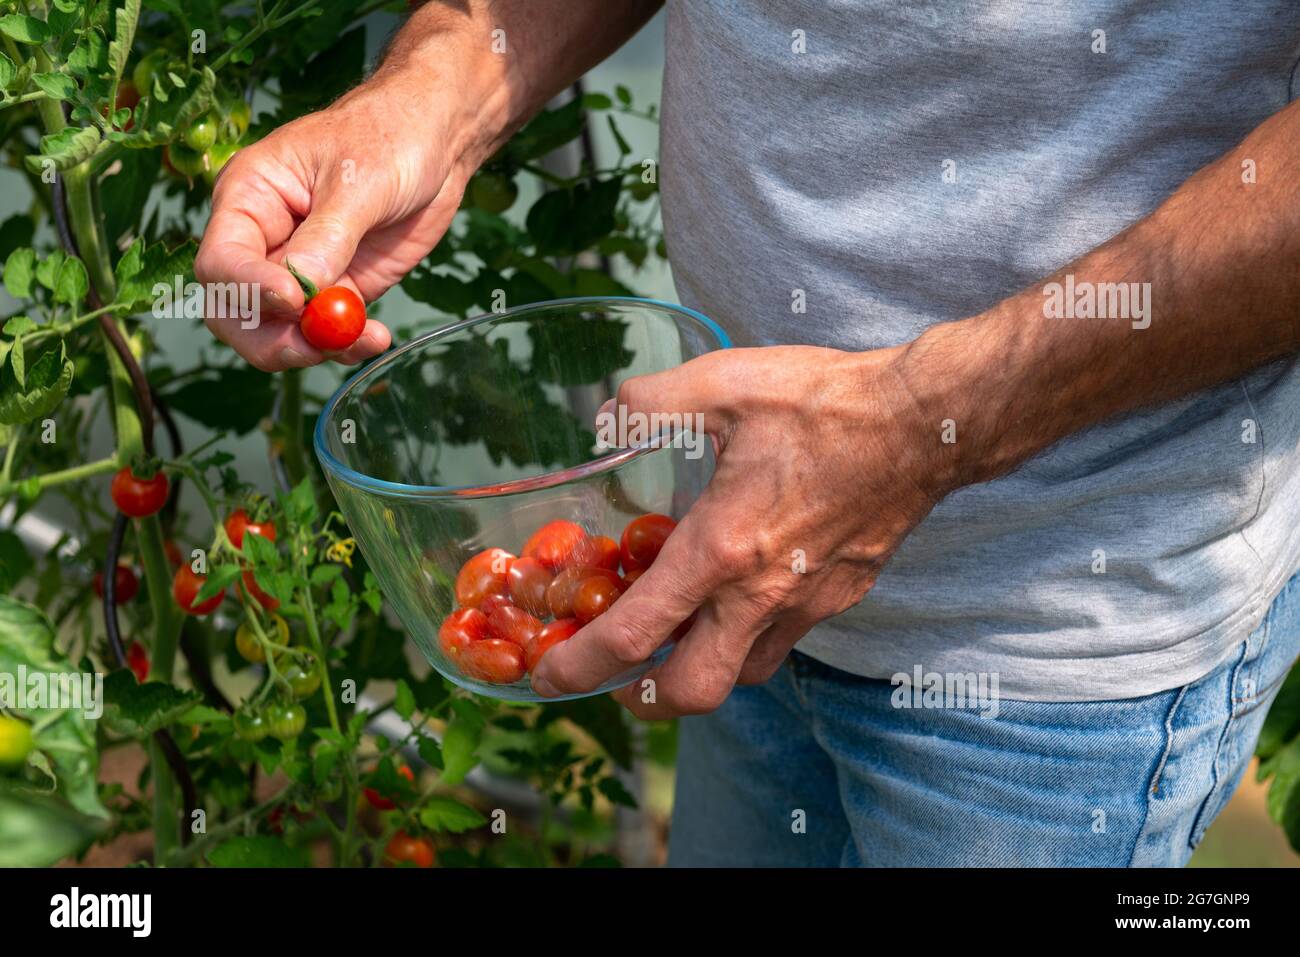 Gardener gathering red cherry tomato in a tight Stock Photo